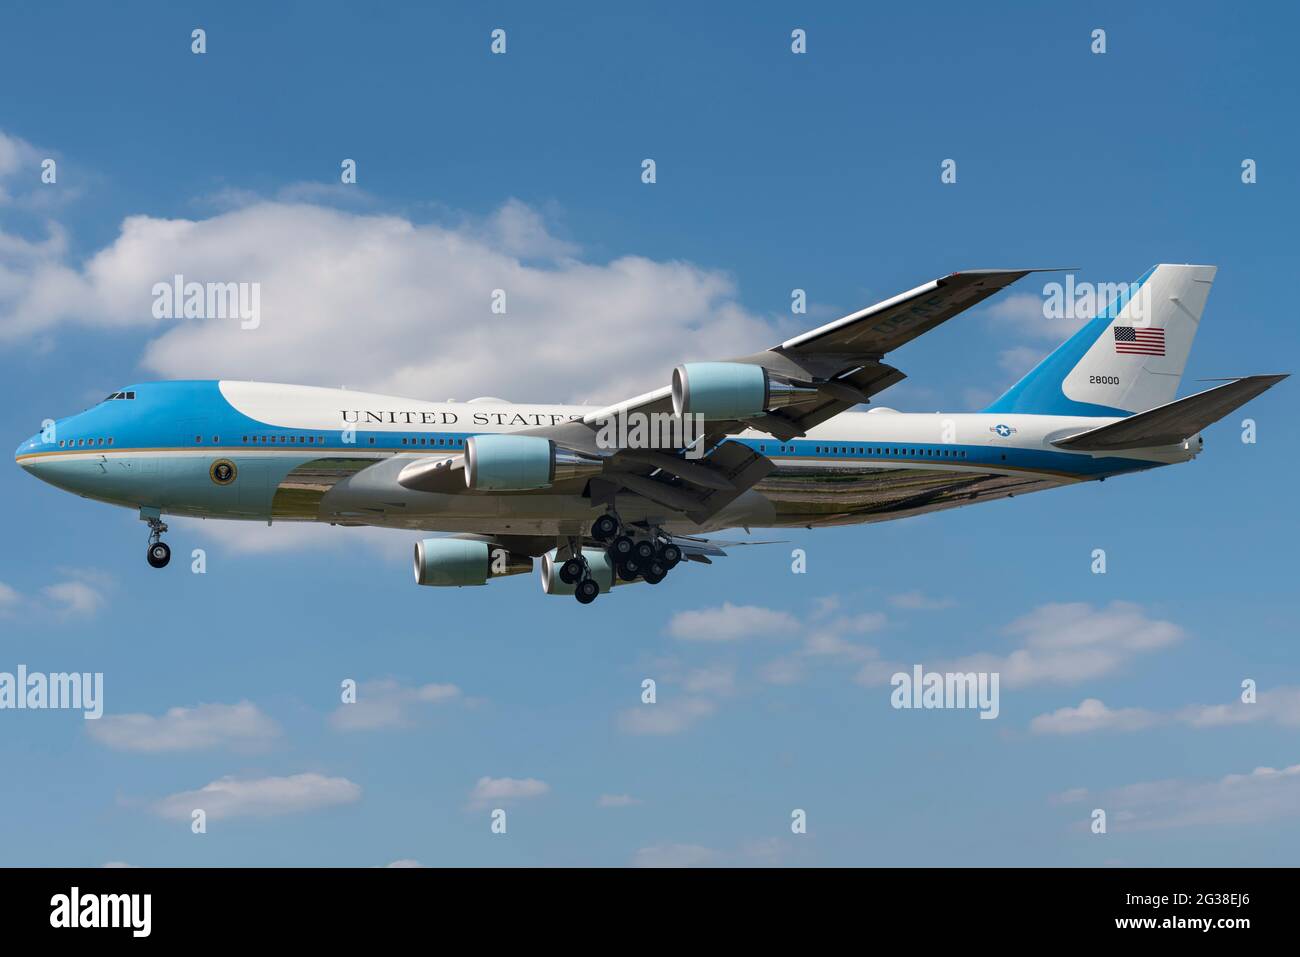 Photo Presidential Aircraft-AIR FORCE ONE Flies over Mt 747 VC-25A Rushmore 